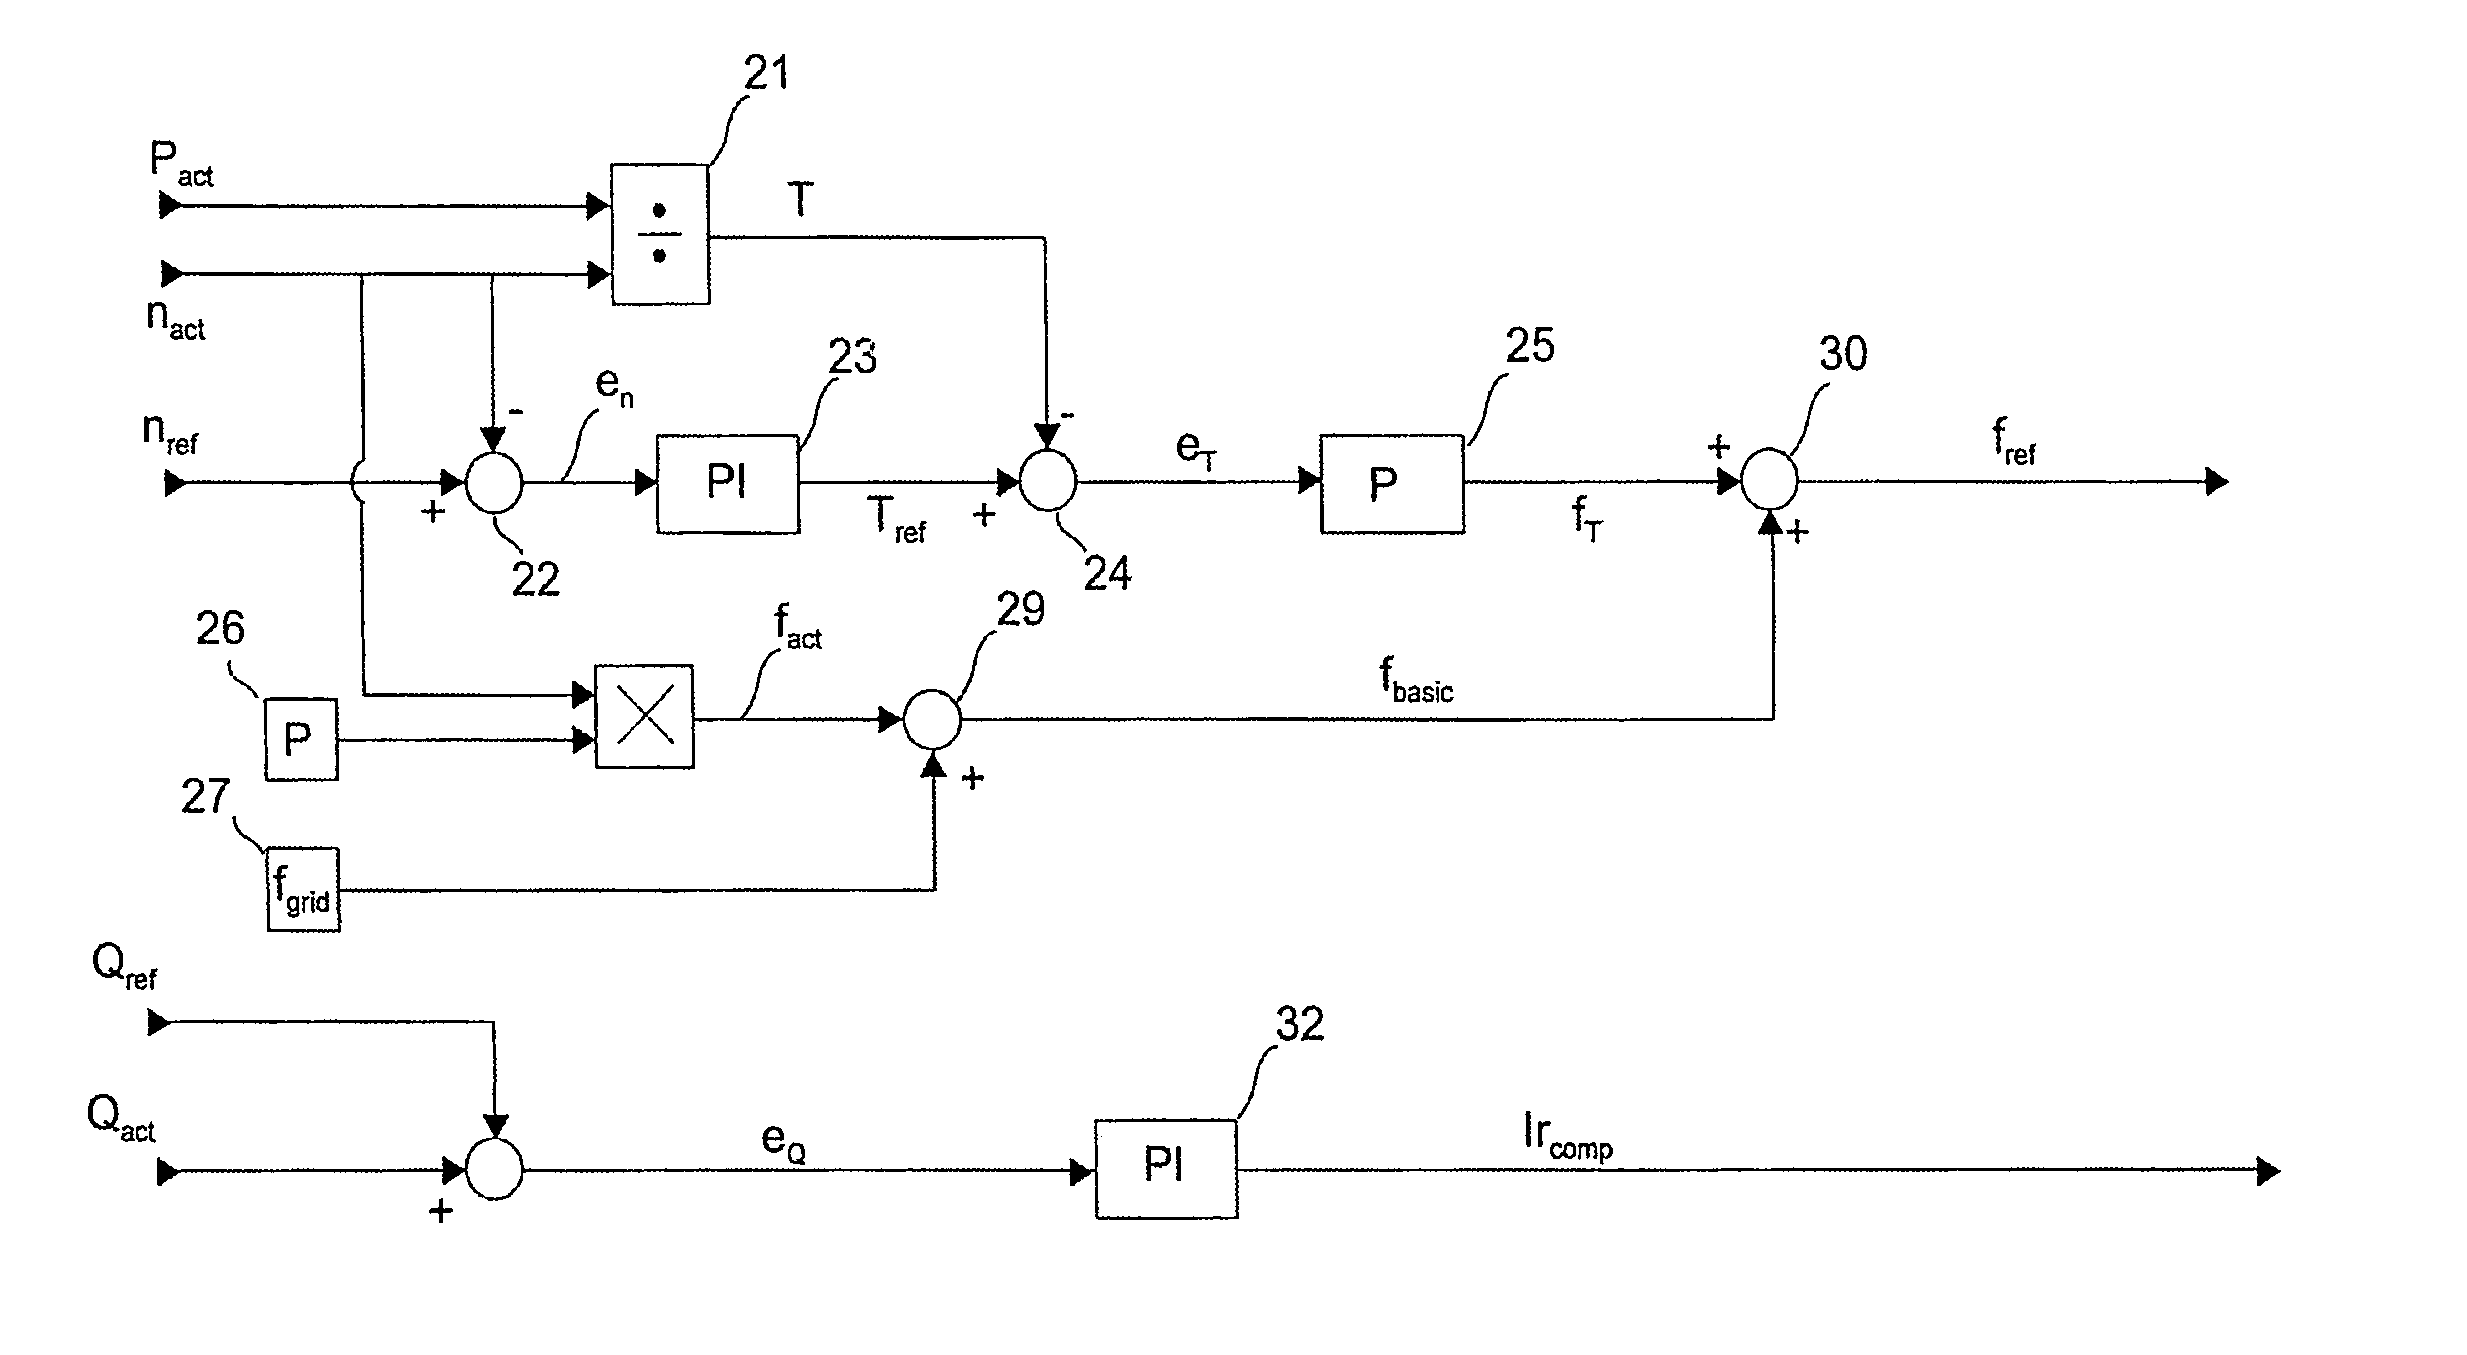 Method for controlling doubly-fed machine